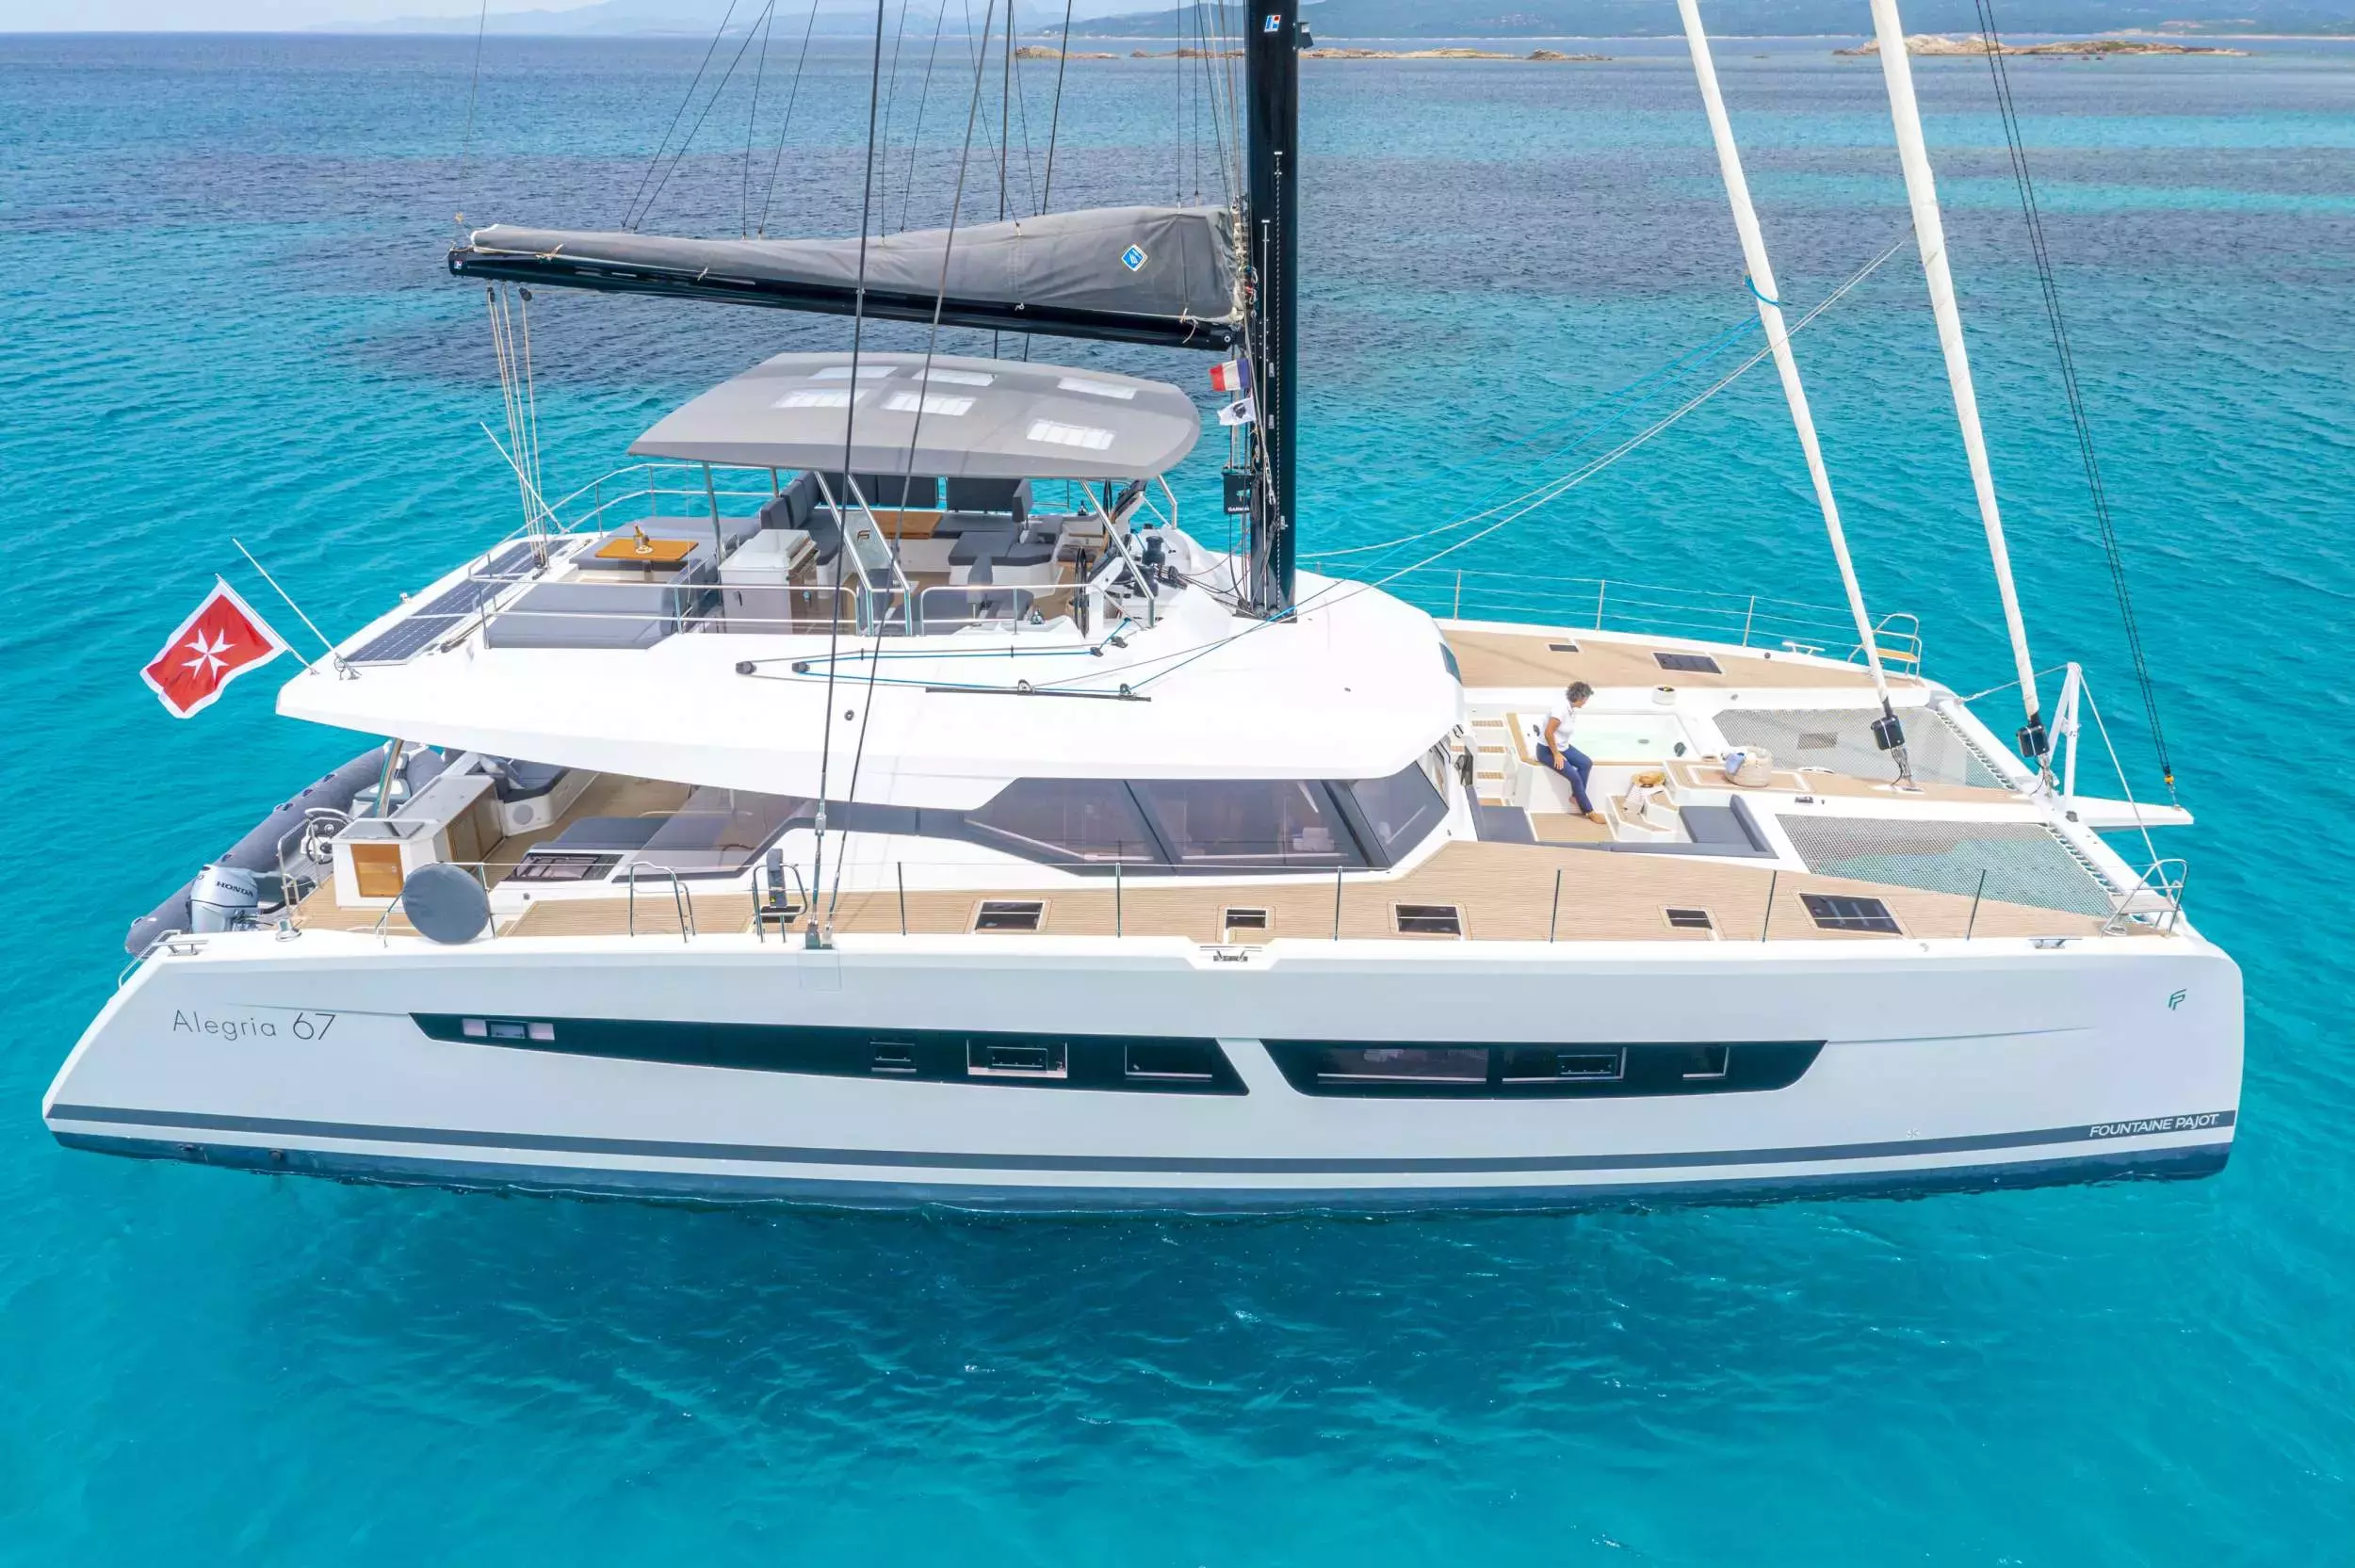 Semper Fidelis by Fountaine Pajot - Top rates for a Rental of a private Sailing Catamaran in Malta